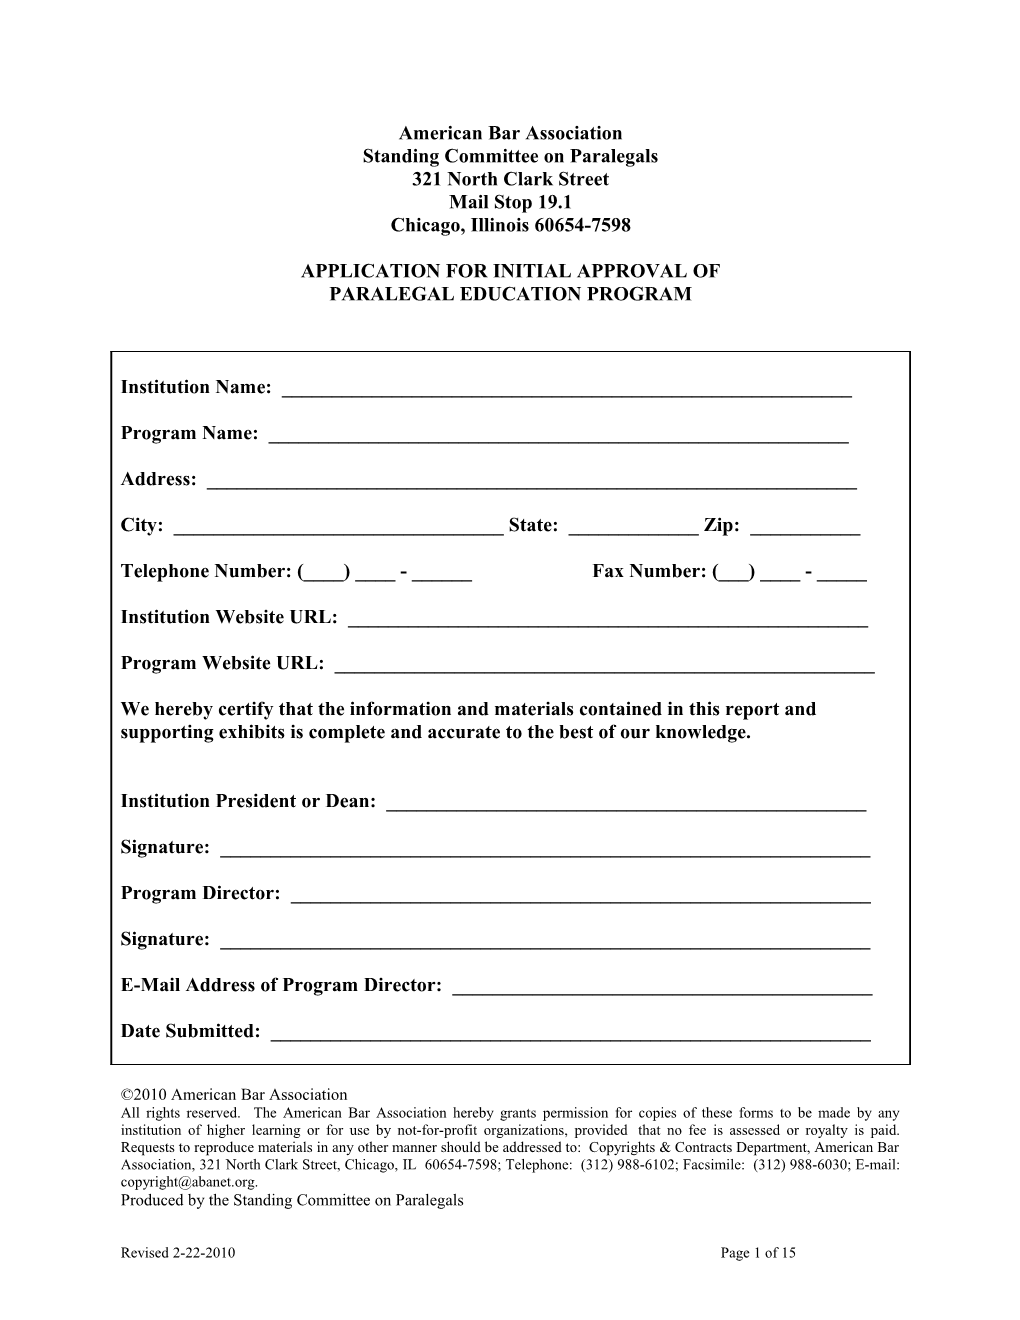 Application for Initial Approval of Paralegal Education Program